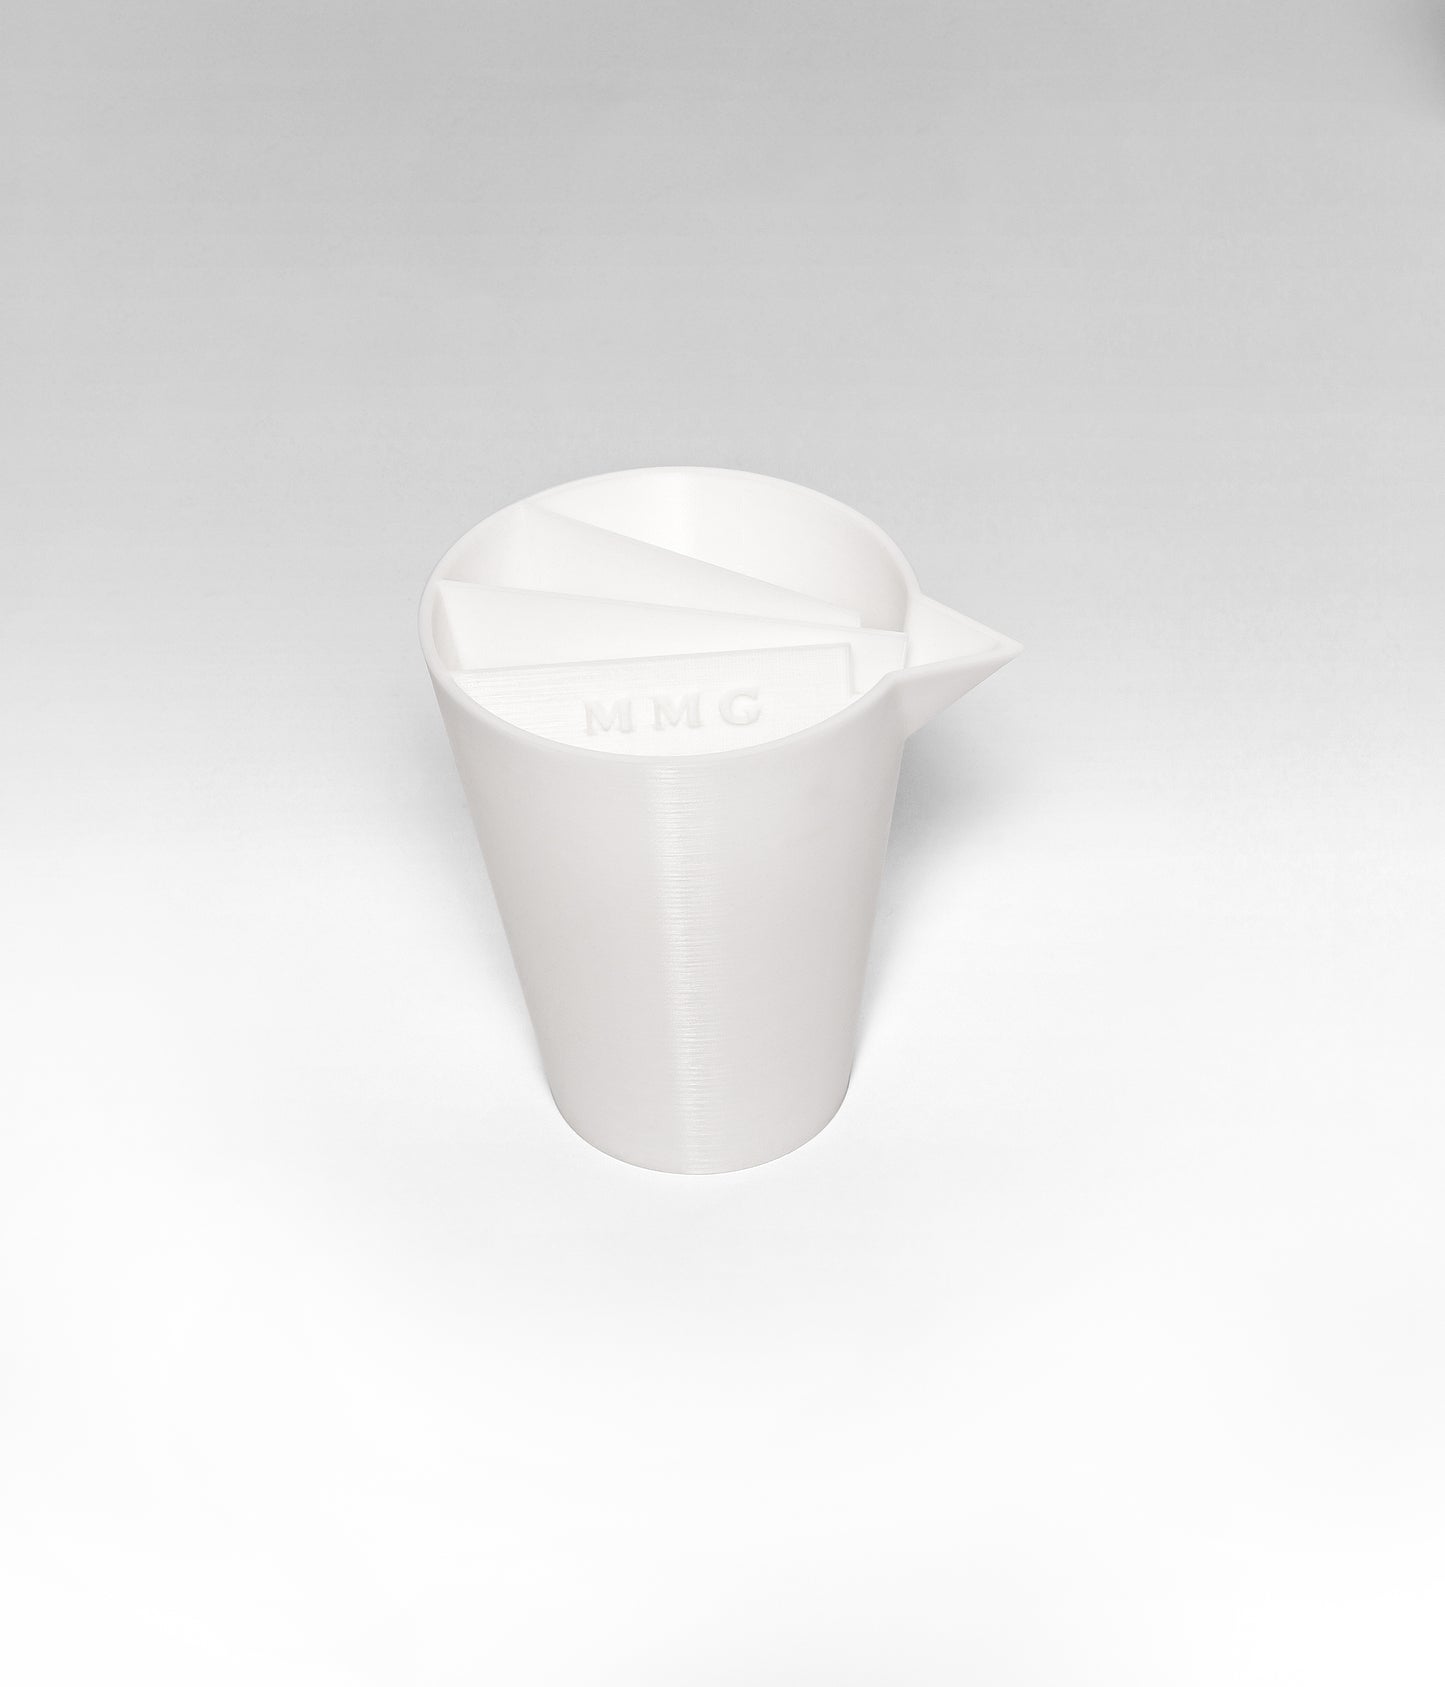 Acrylic Pouring Plastic TRIPLE Split Cup 10 or 16 oz with 4 compartments